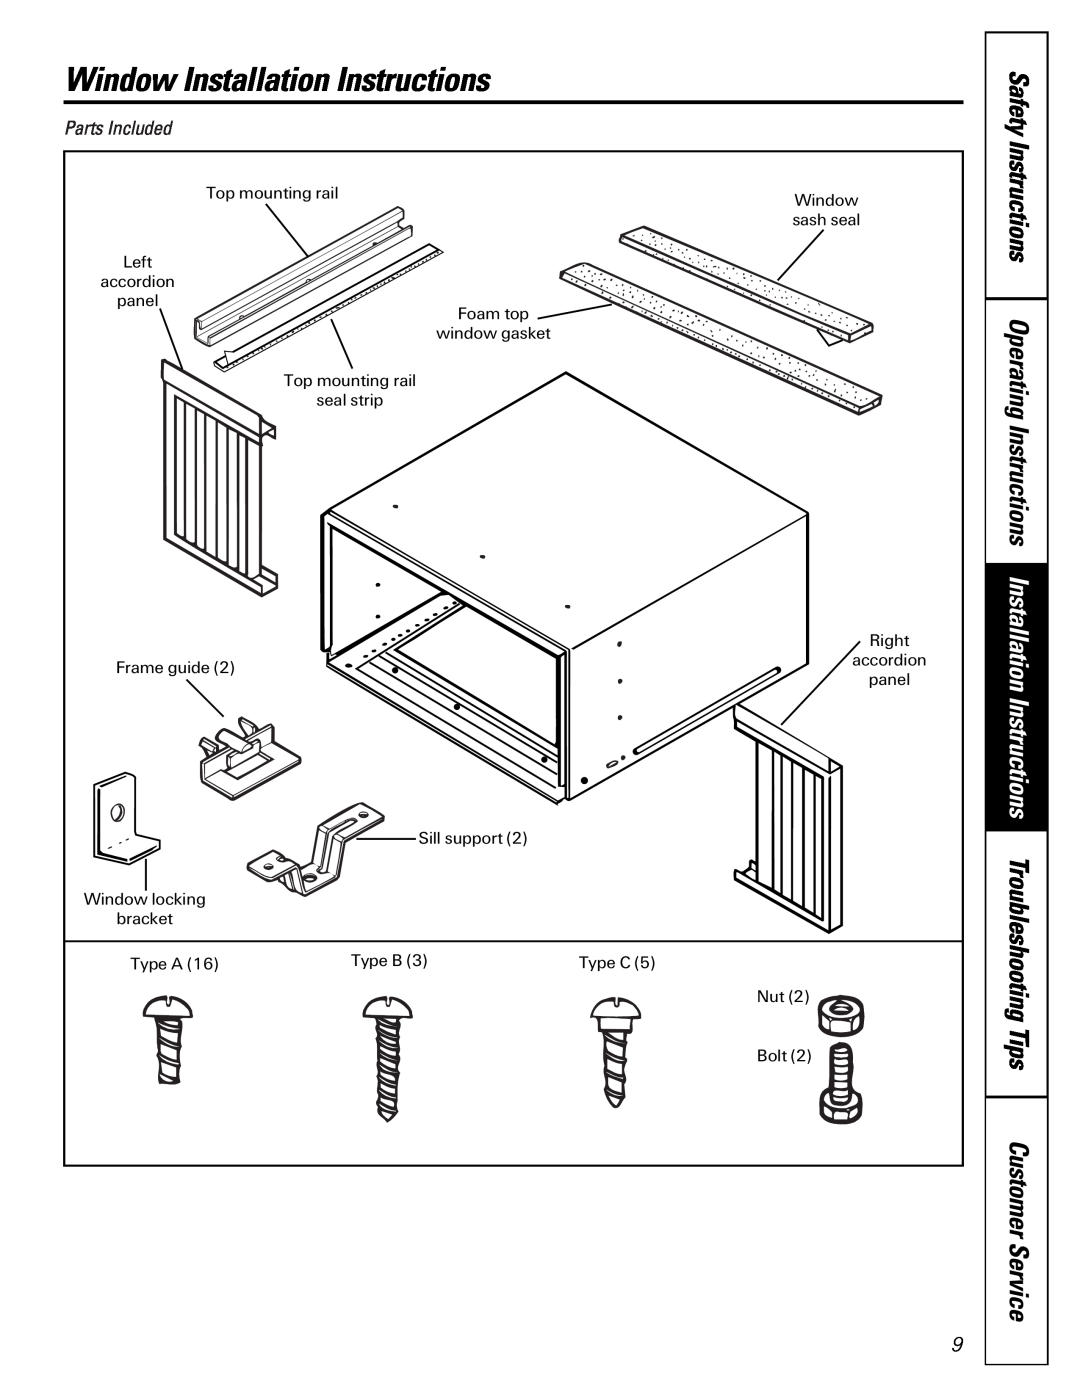 GE 000 BTU models, AG_12  12, AG_08  8, AG_10  10 Window Installation Instructions, Customer Service, Parts Included 